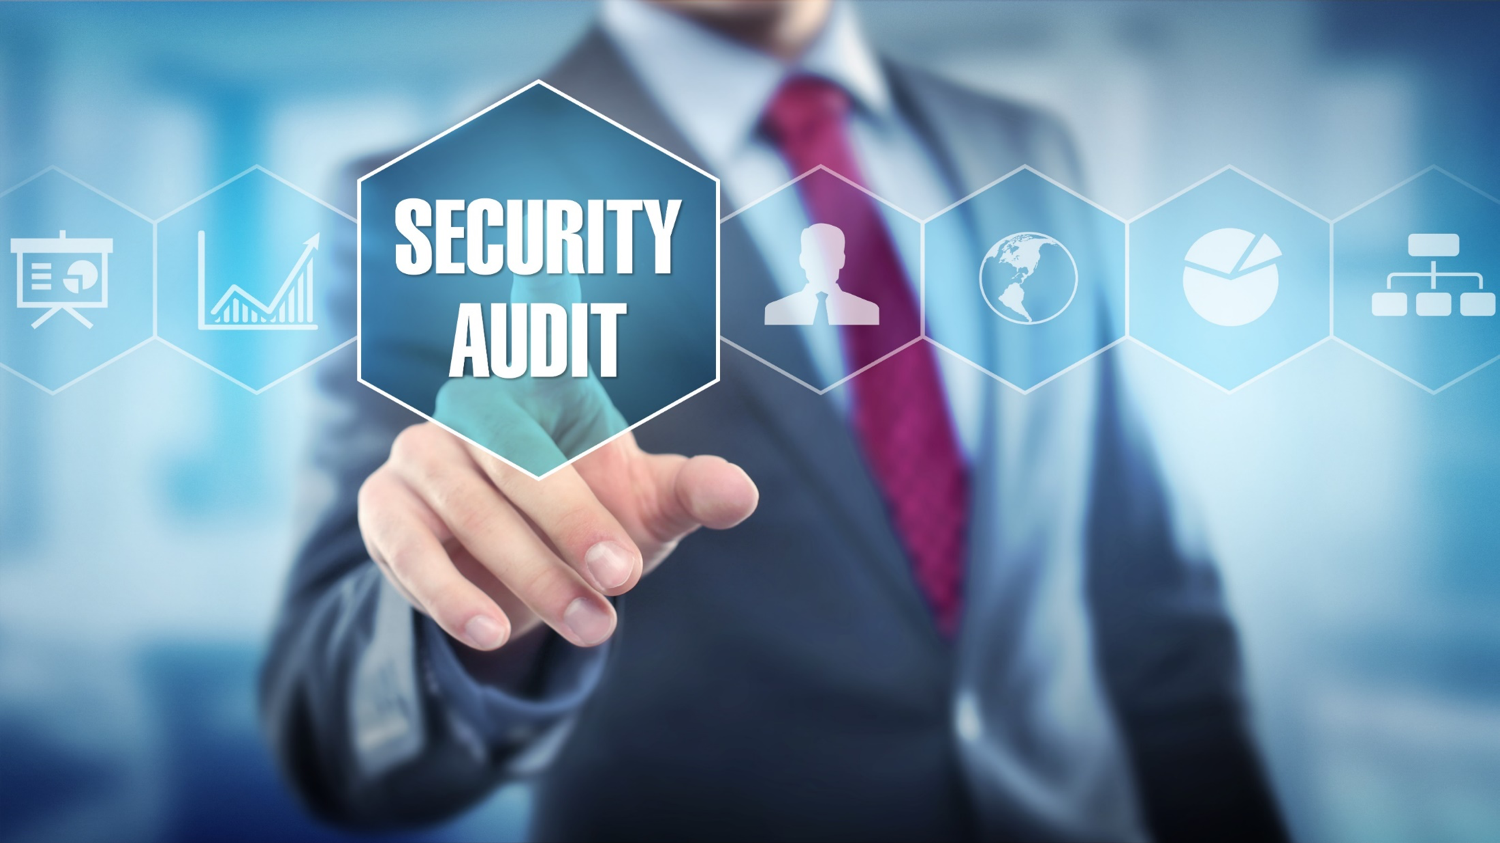 WAV Group Technology Service - Security Audit and Compliance